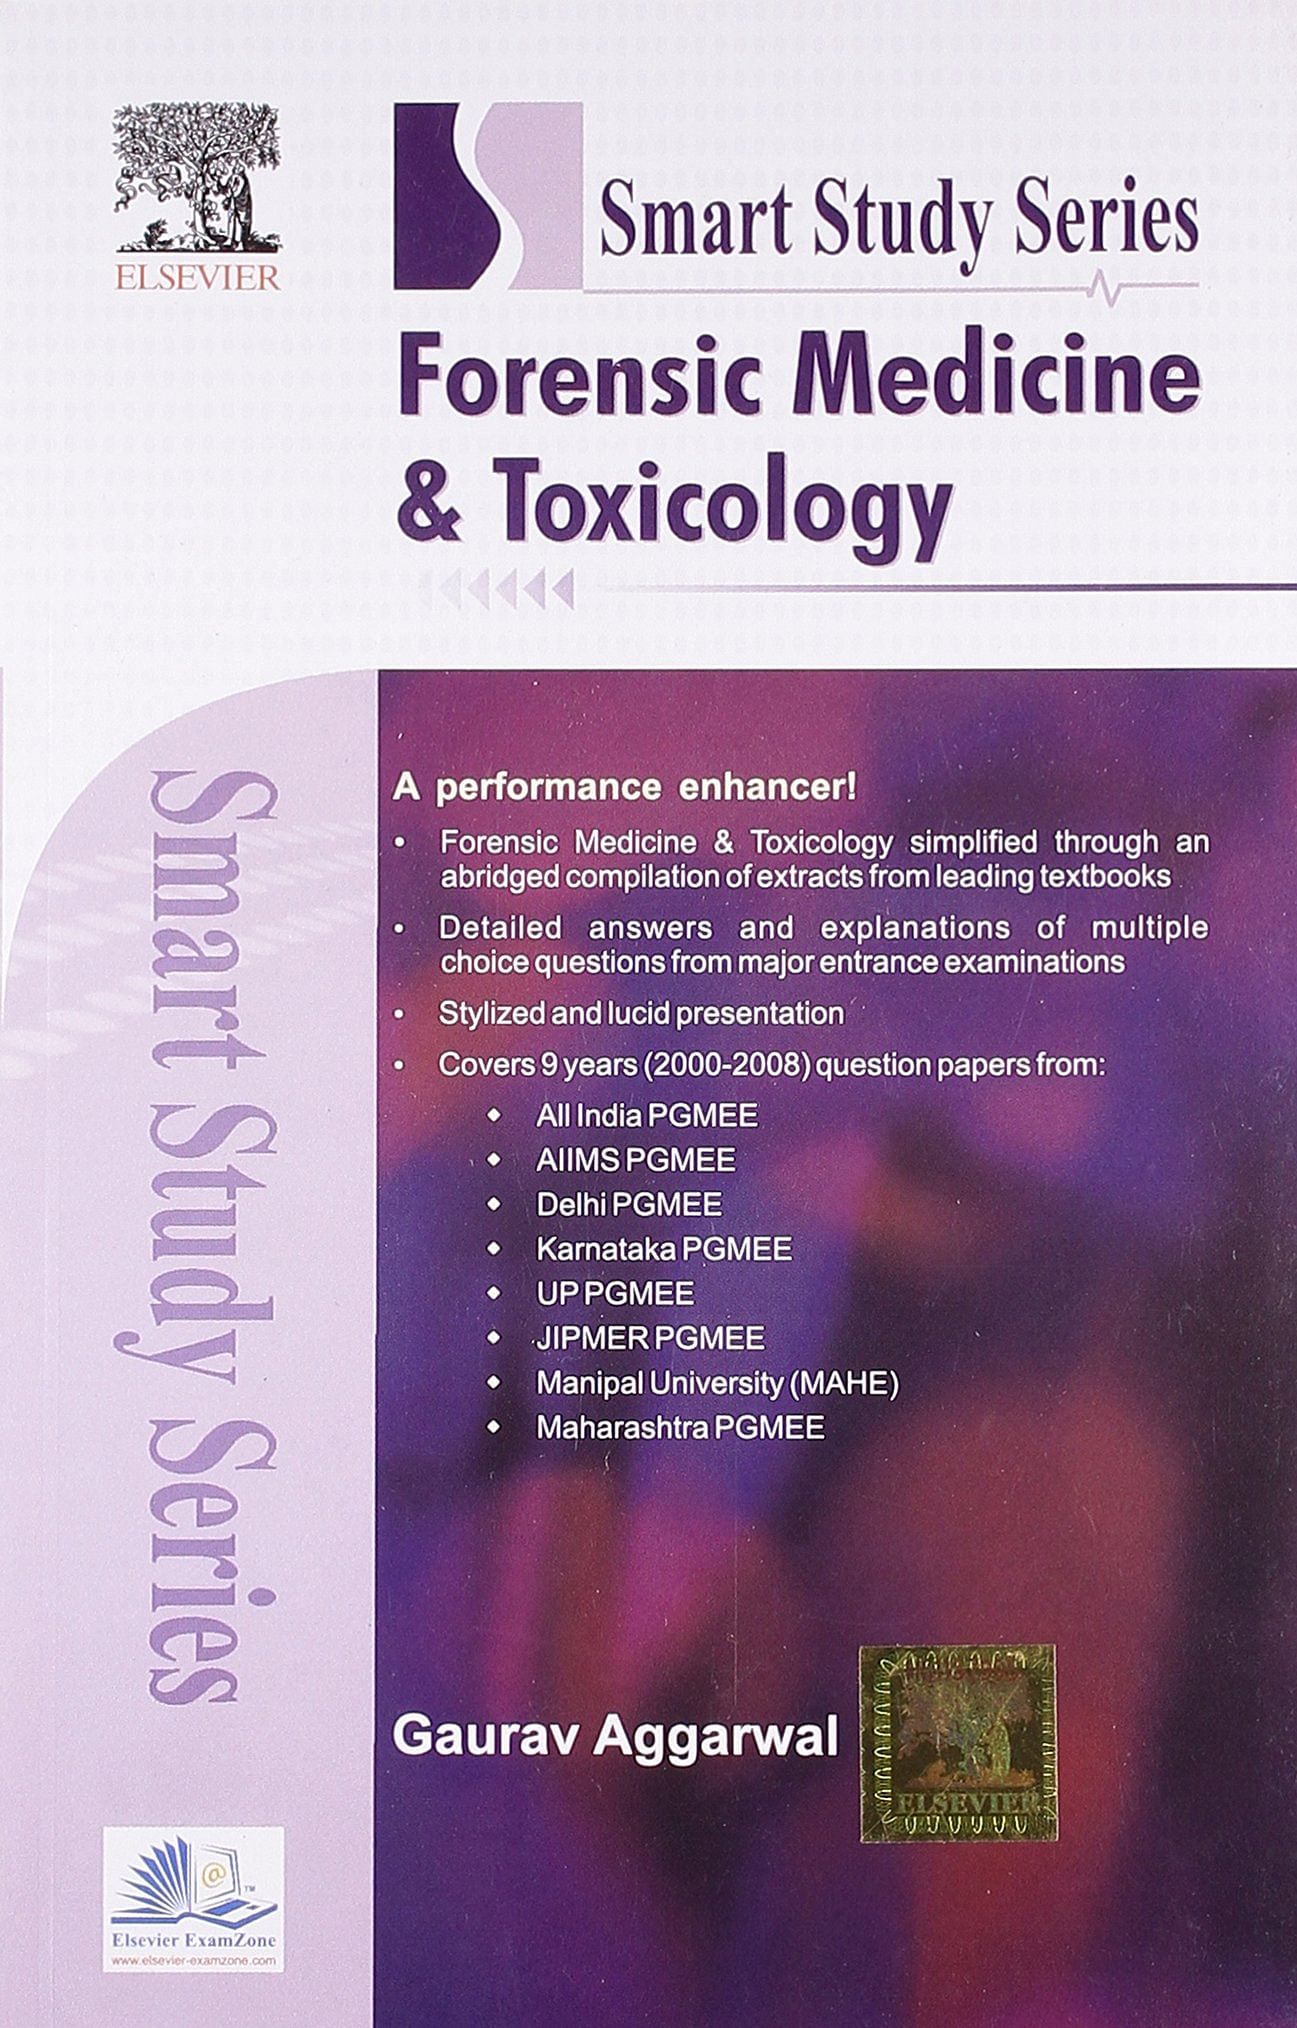 Smart Study Series: Forensic Medicine and Toxicology by Dr. Gaurav Aggarwal